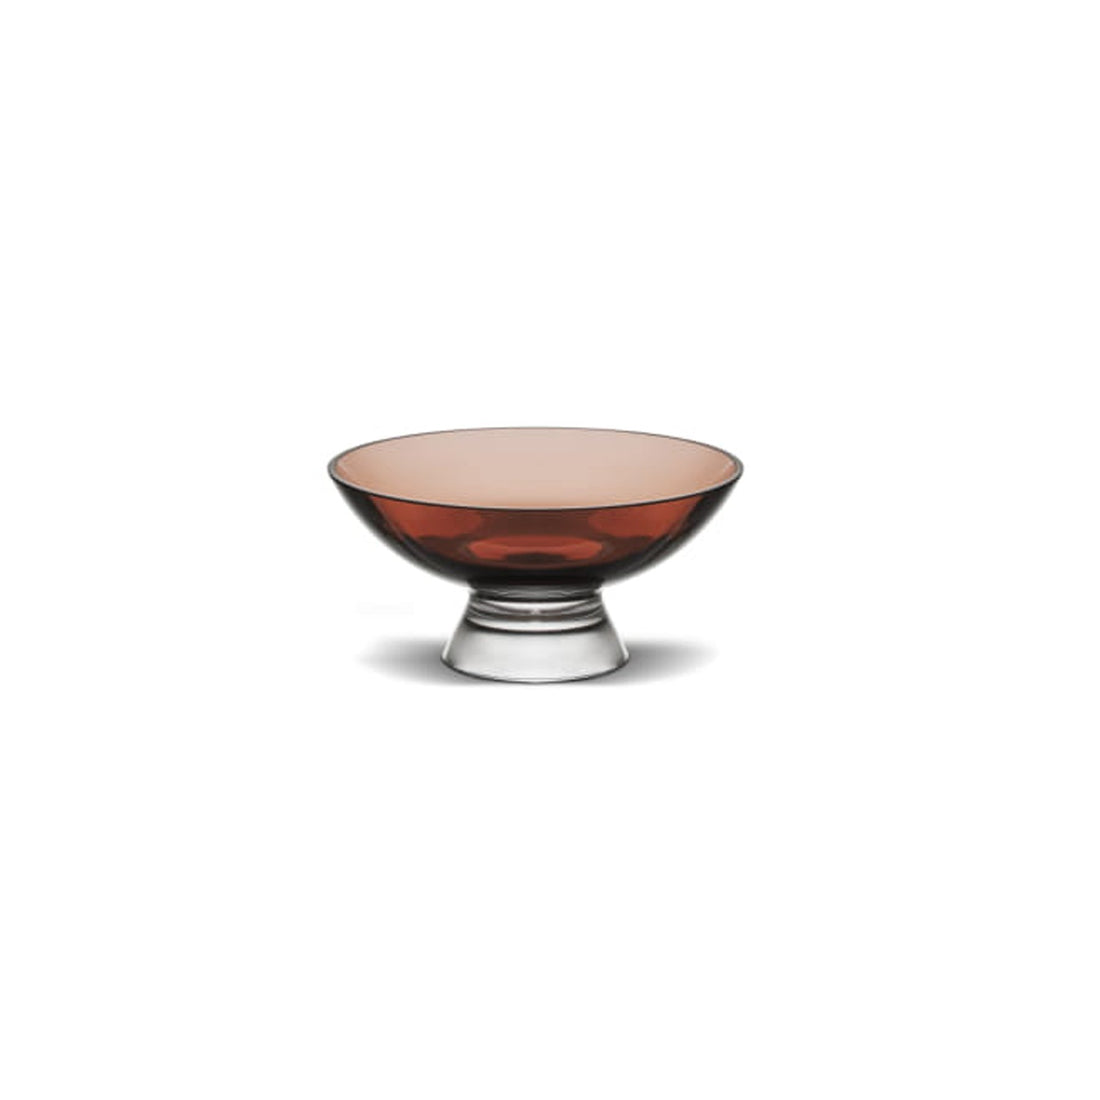 Nude Glass Silhouette Bowl small in caramel lead-free glass